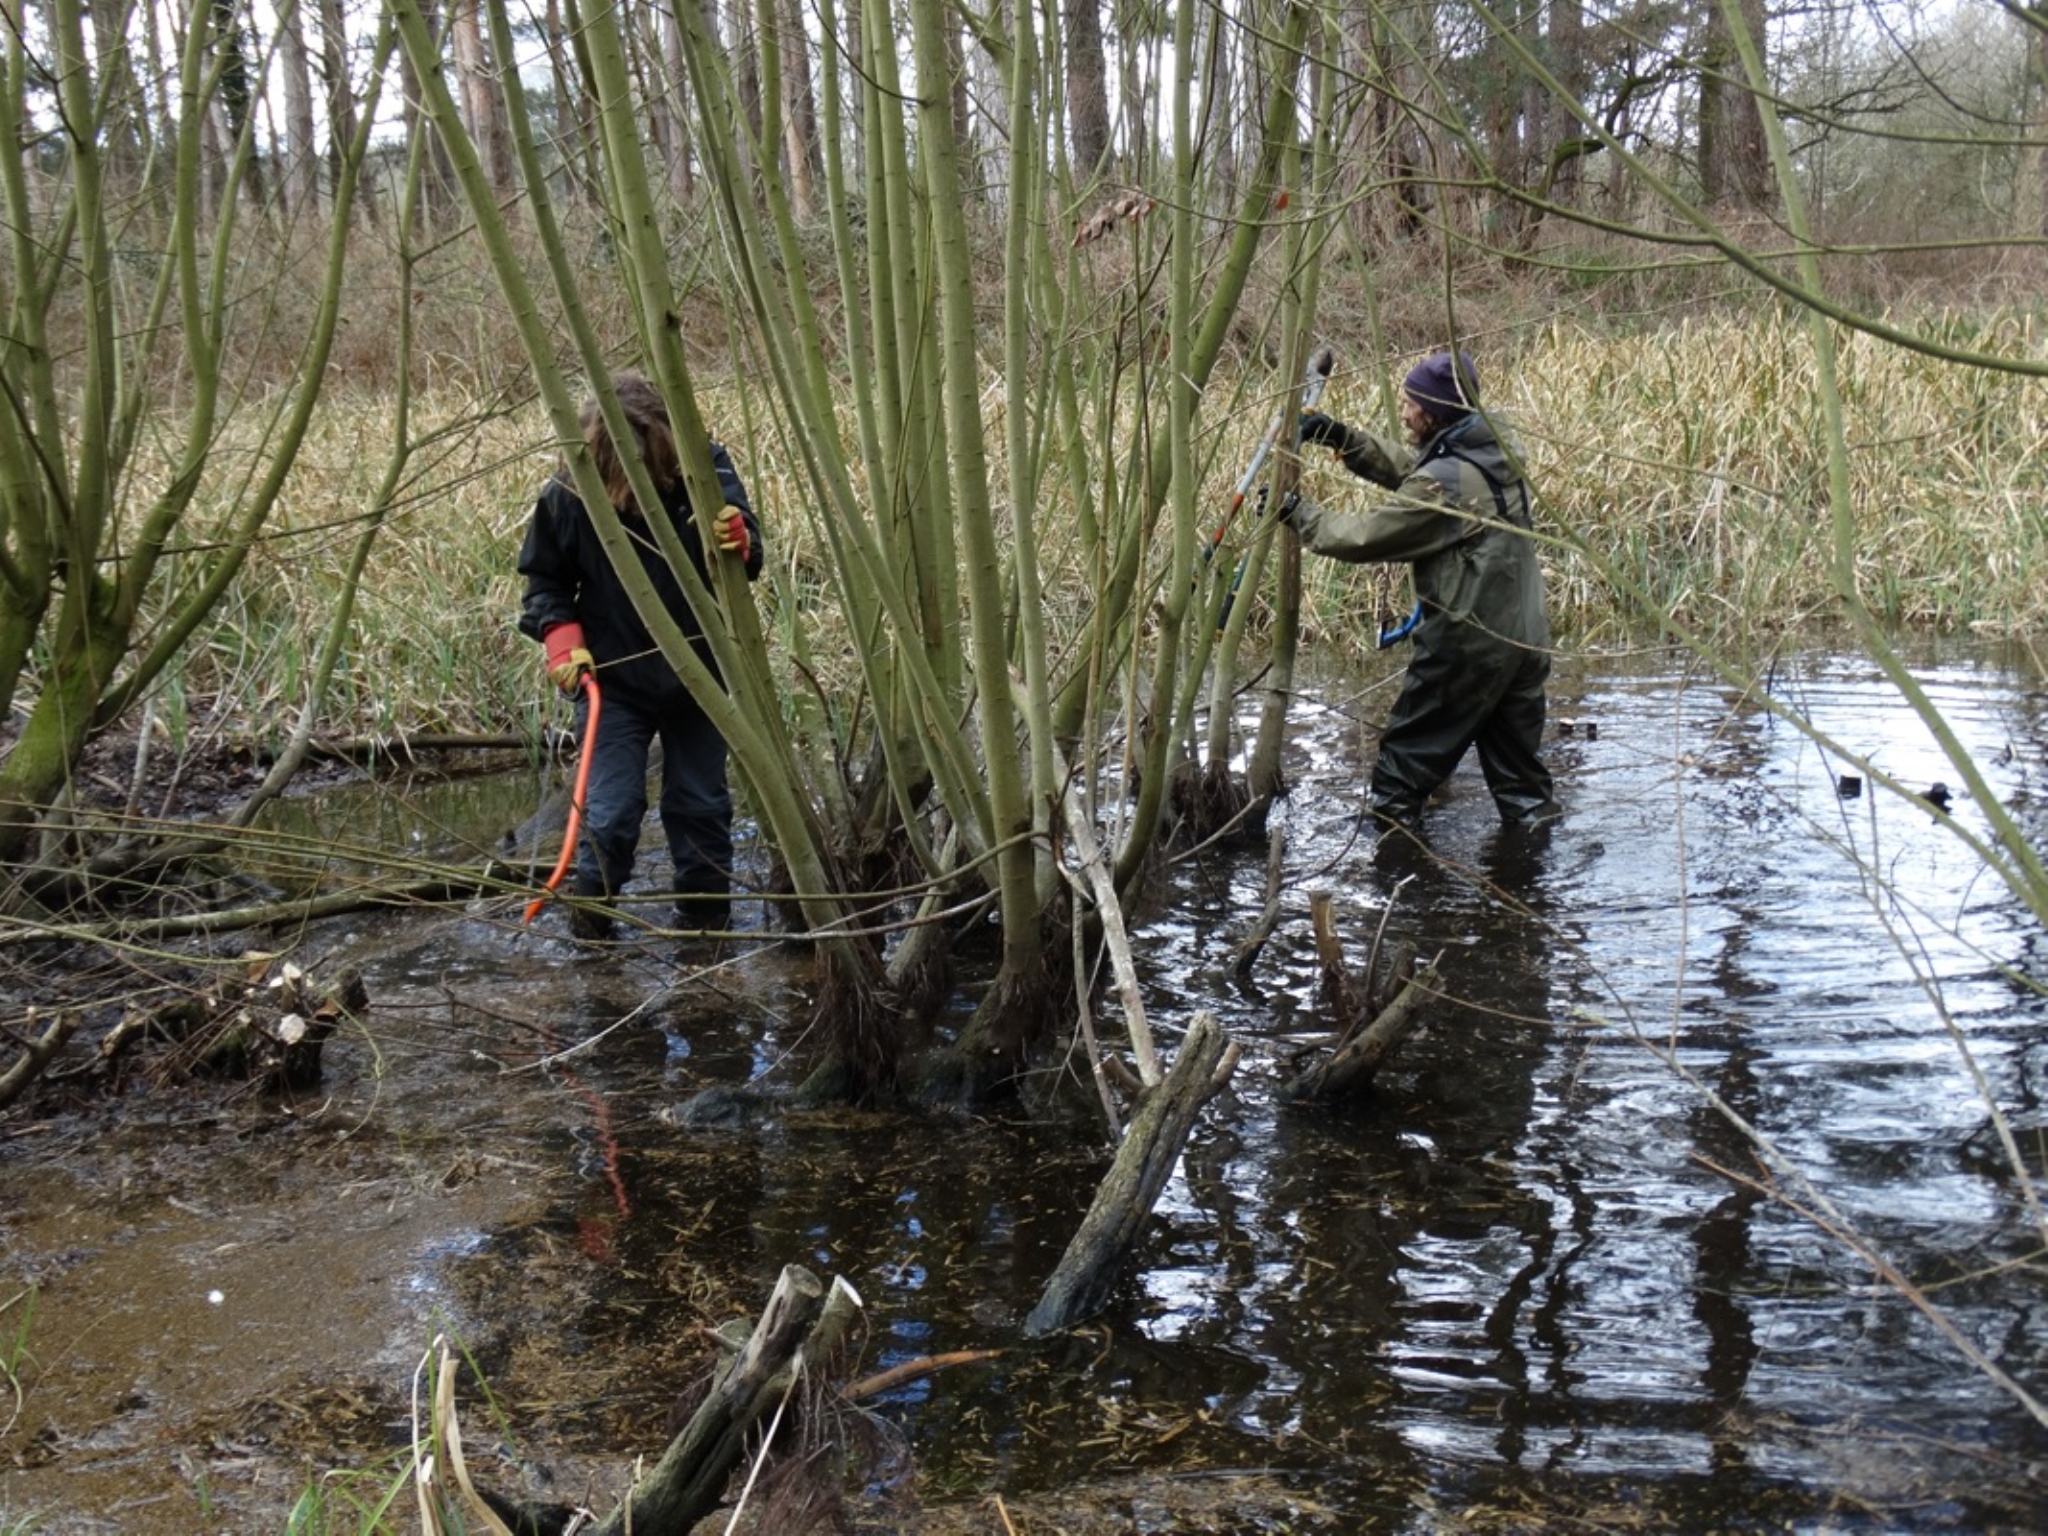 A photo from the FoTF Conservation Event - March 2019 - Clearance work around, and in, the ponds at Harling Woods, Harling : Volunteers tackle a small tree in one of the ponds